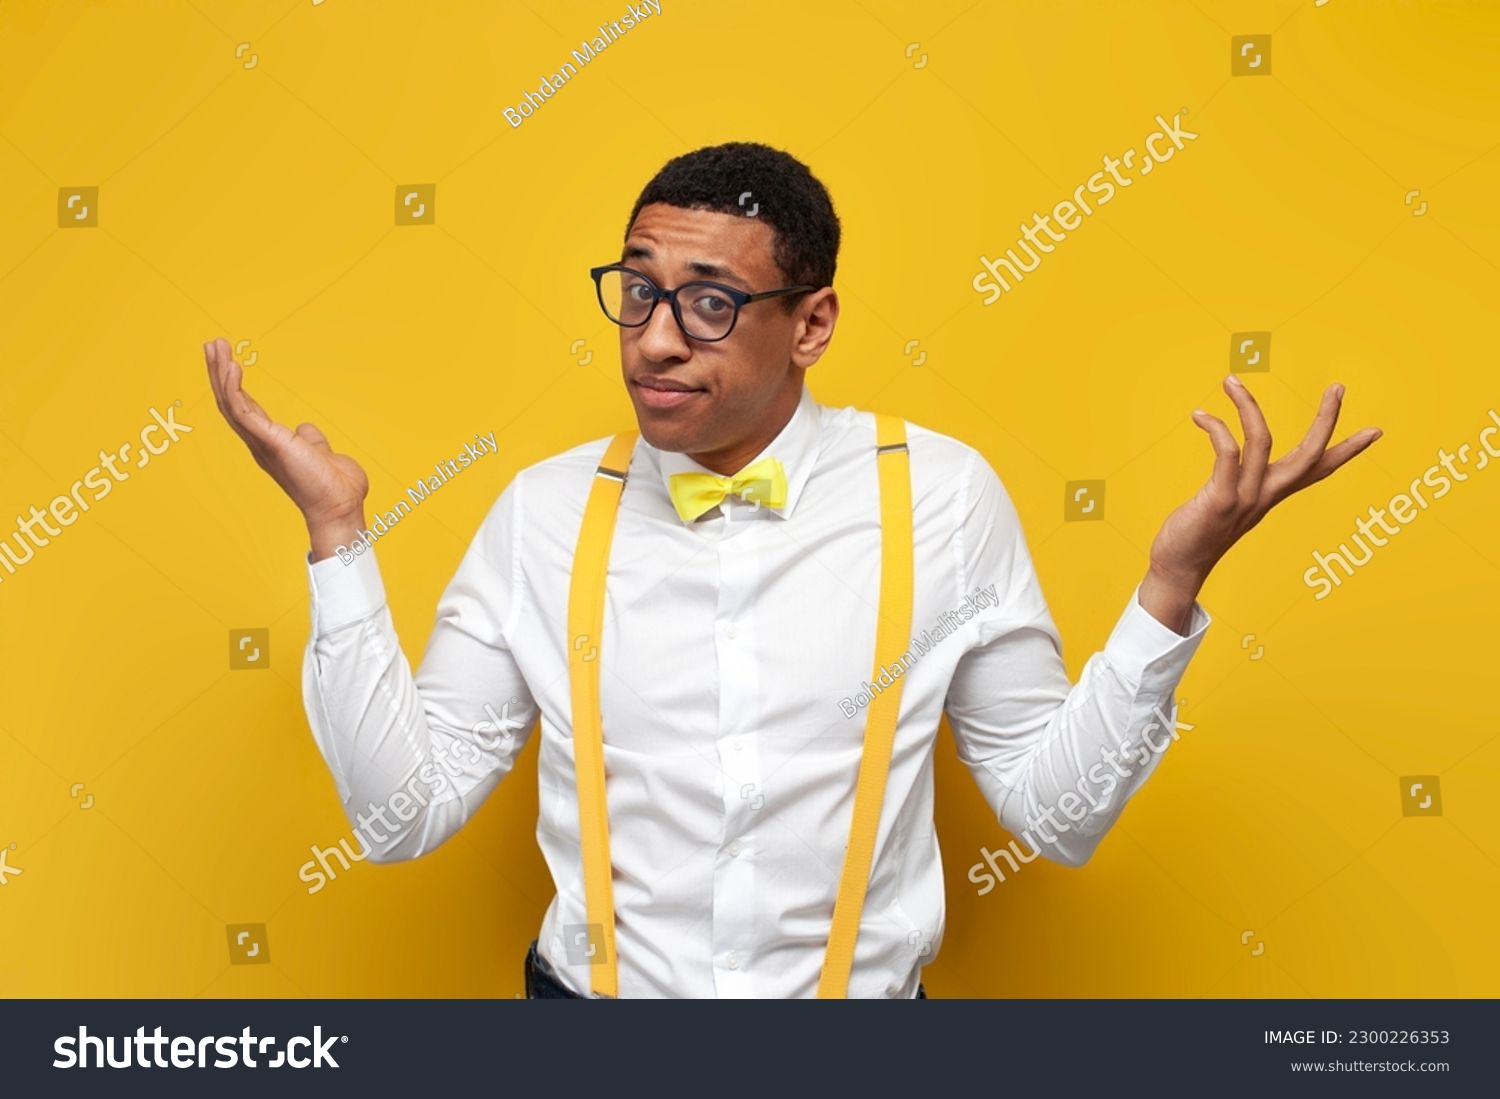 young insecure guy african american in white shirt with suspenders and bow tie spreads his arms on yellow isolated background, nerd man in glasses shrugs his shoulders #2300226353